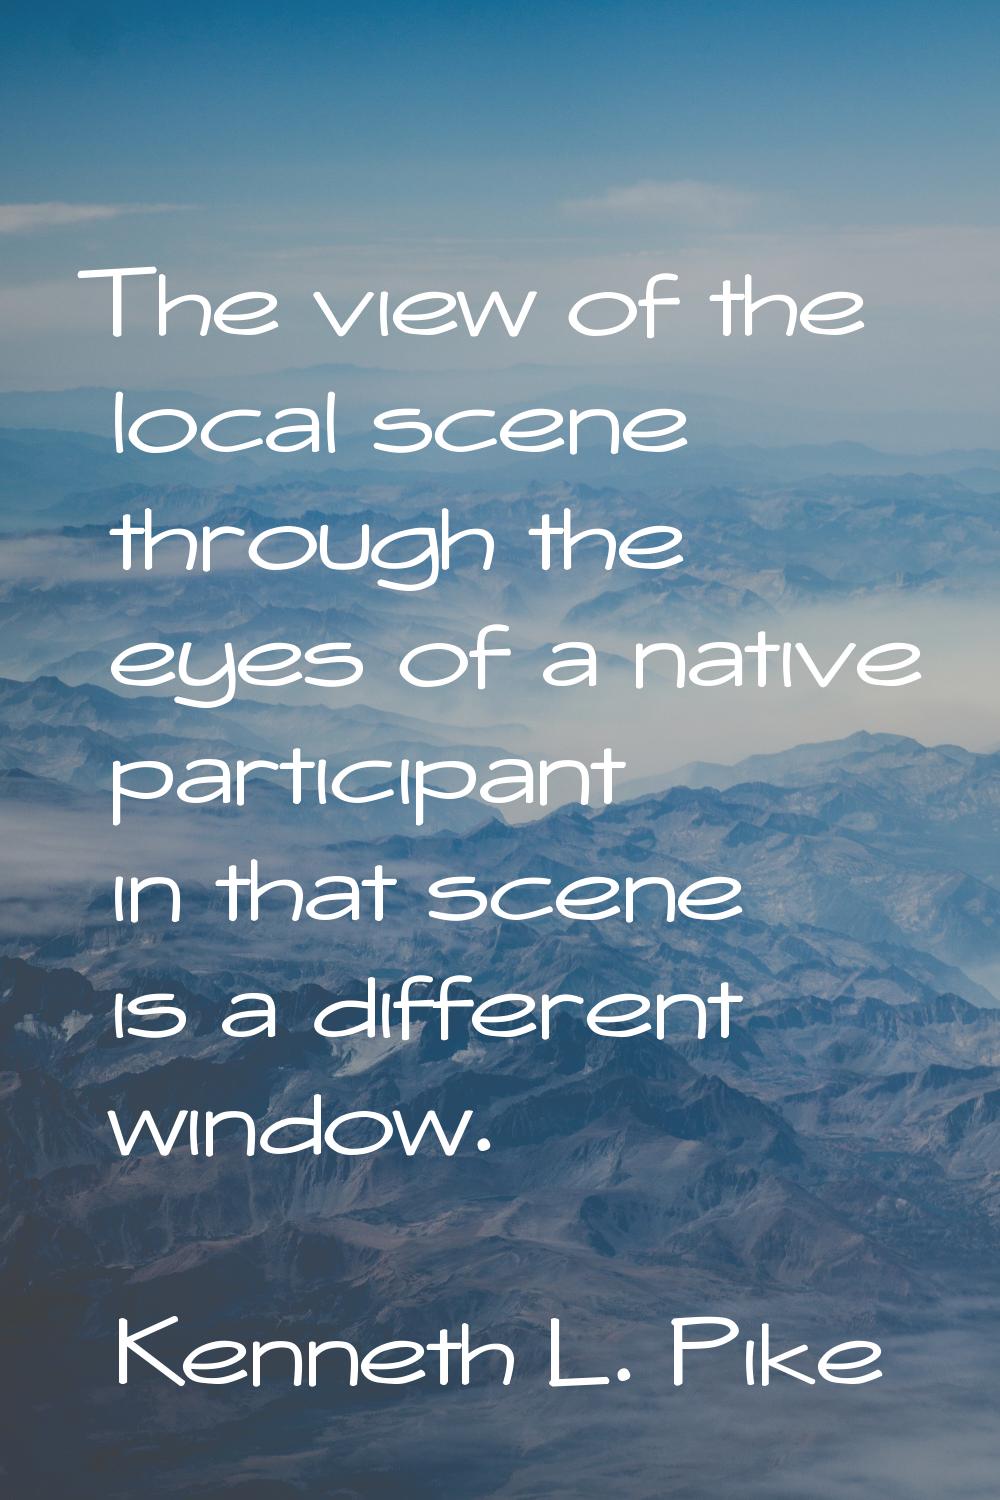 The view of the local scene through the eyes of a native participant in that scene is a different w